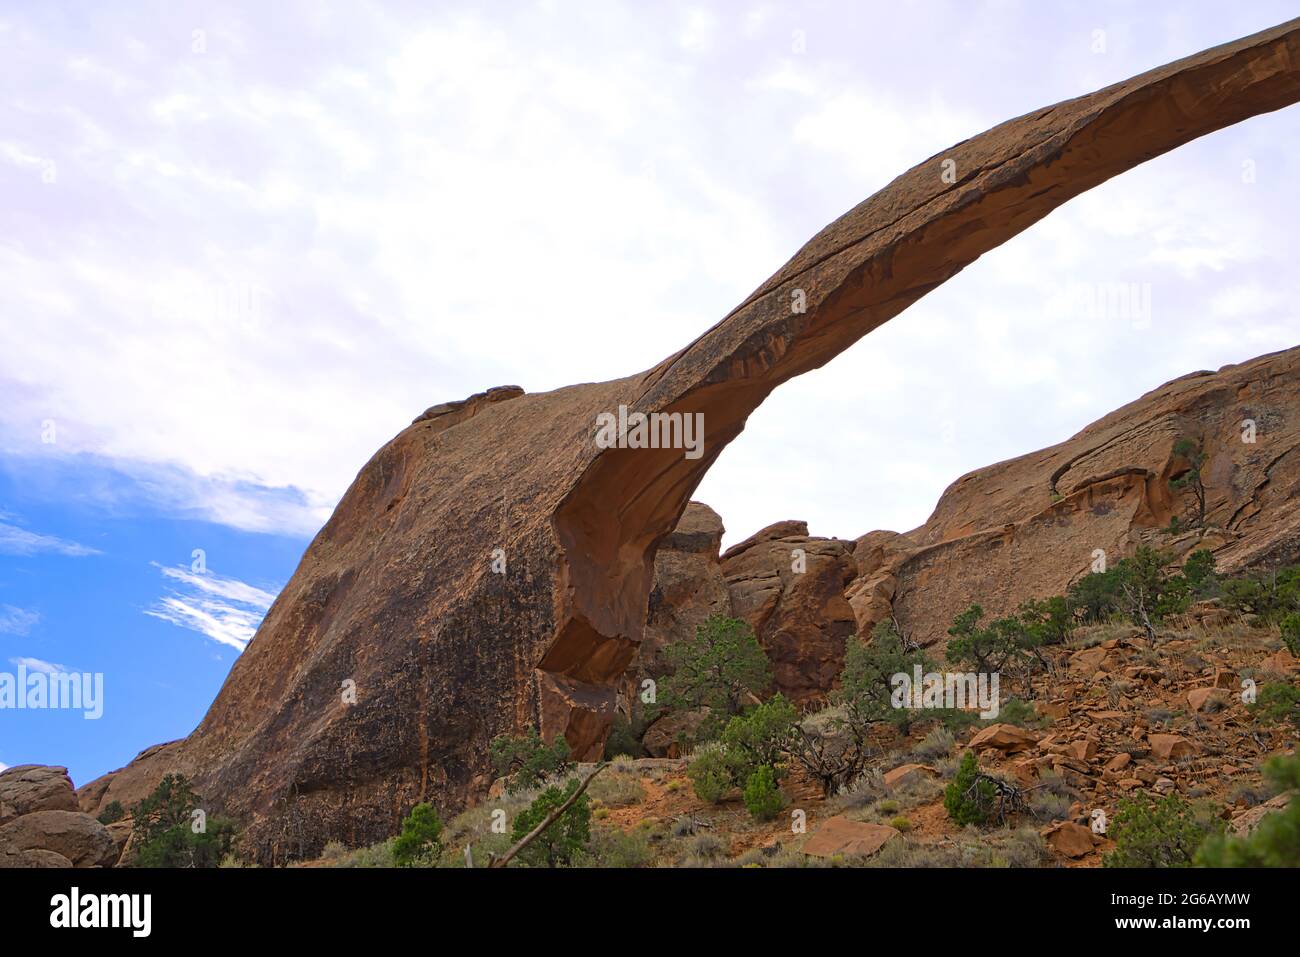 More than 2,000 natural sandstone arches are located in Arches National Park.  The highest density of natural arches in the world. Utah, USA. 2017. Stock Photo